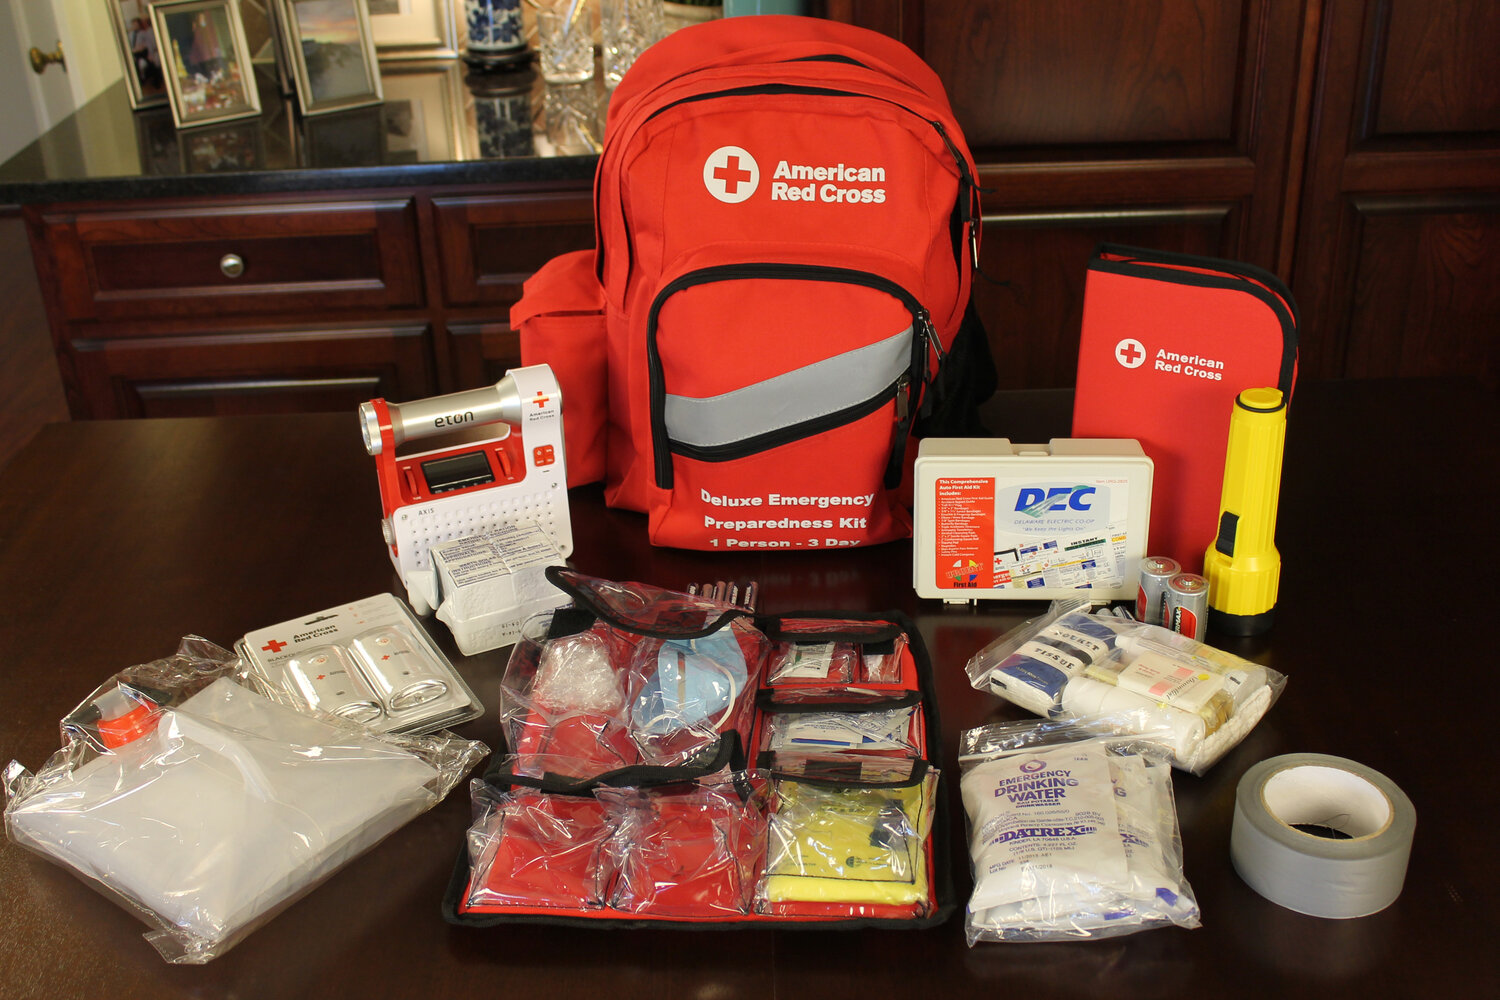 Delaware Electric Cooperative urges members to prepare an emergency kit for their households this hurricane season.